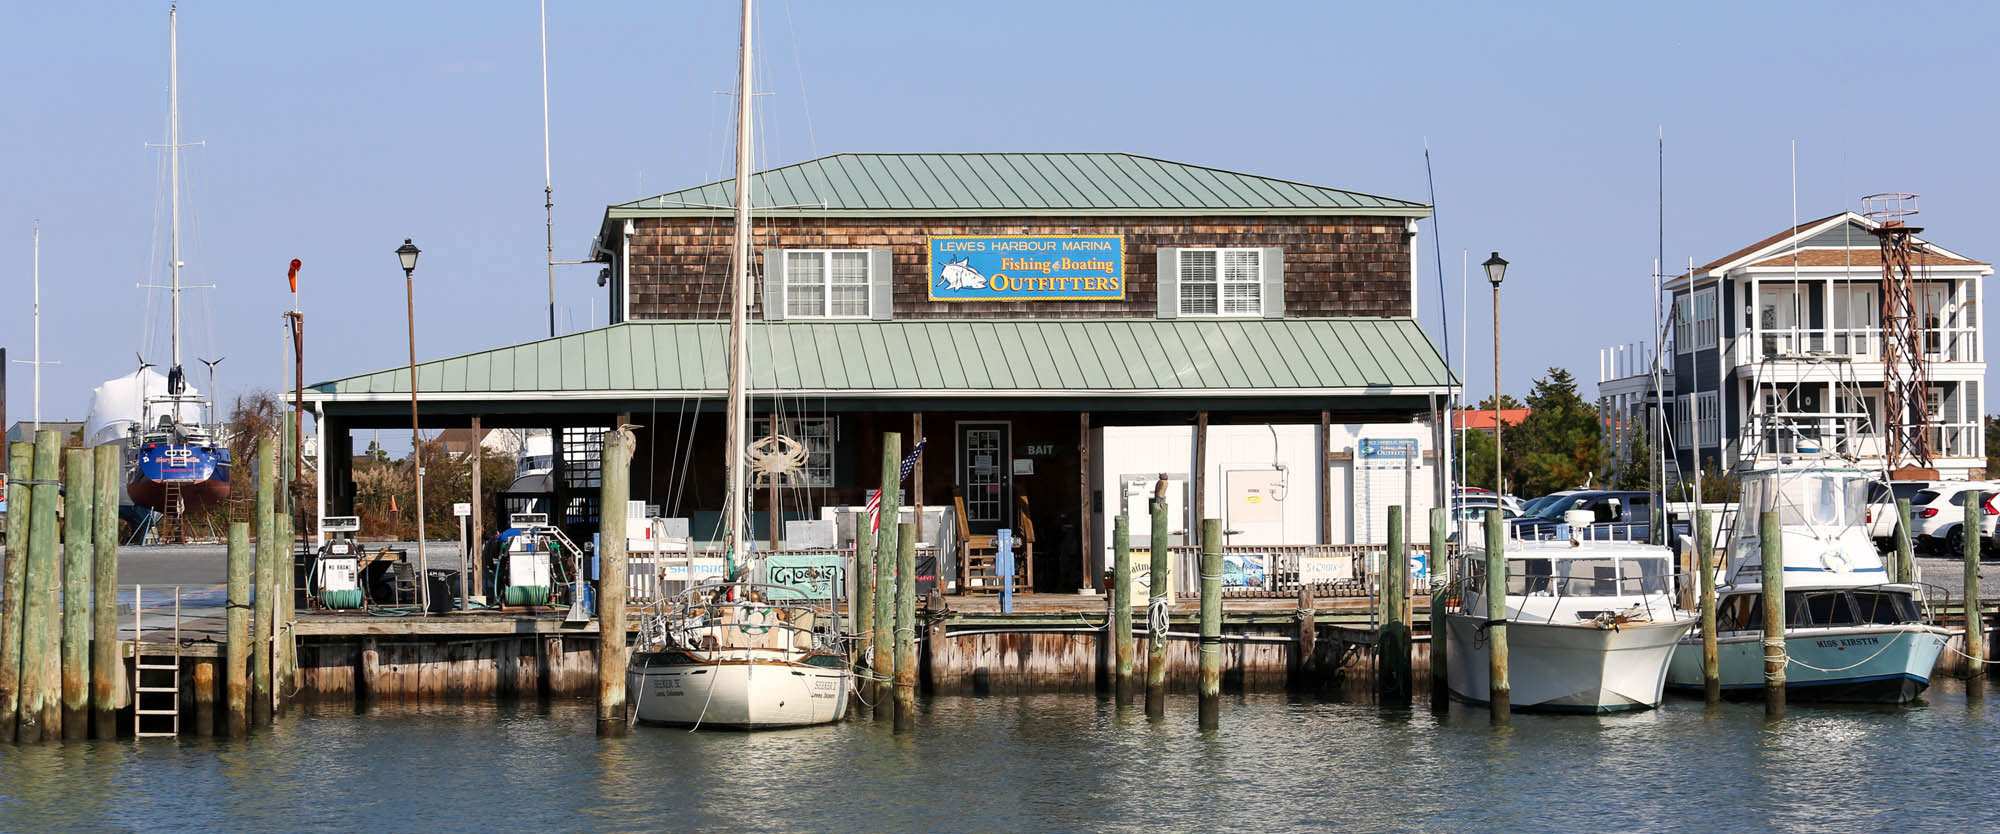 https://www.thefisherman.com/wp-content/uploads/2020/09/Lewes-Harbour-Marina-Image-Store-Waters-View.jpg